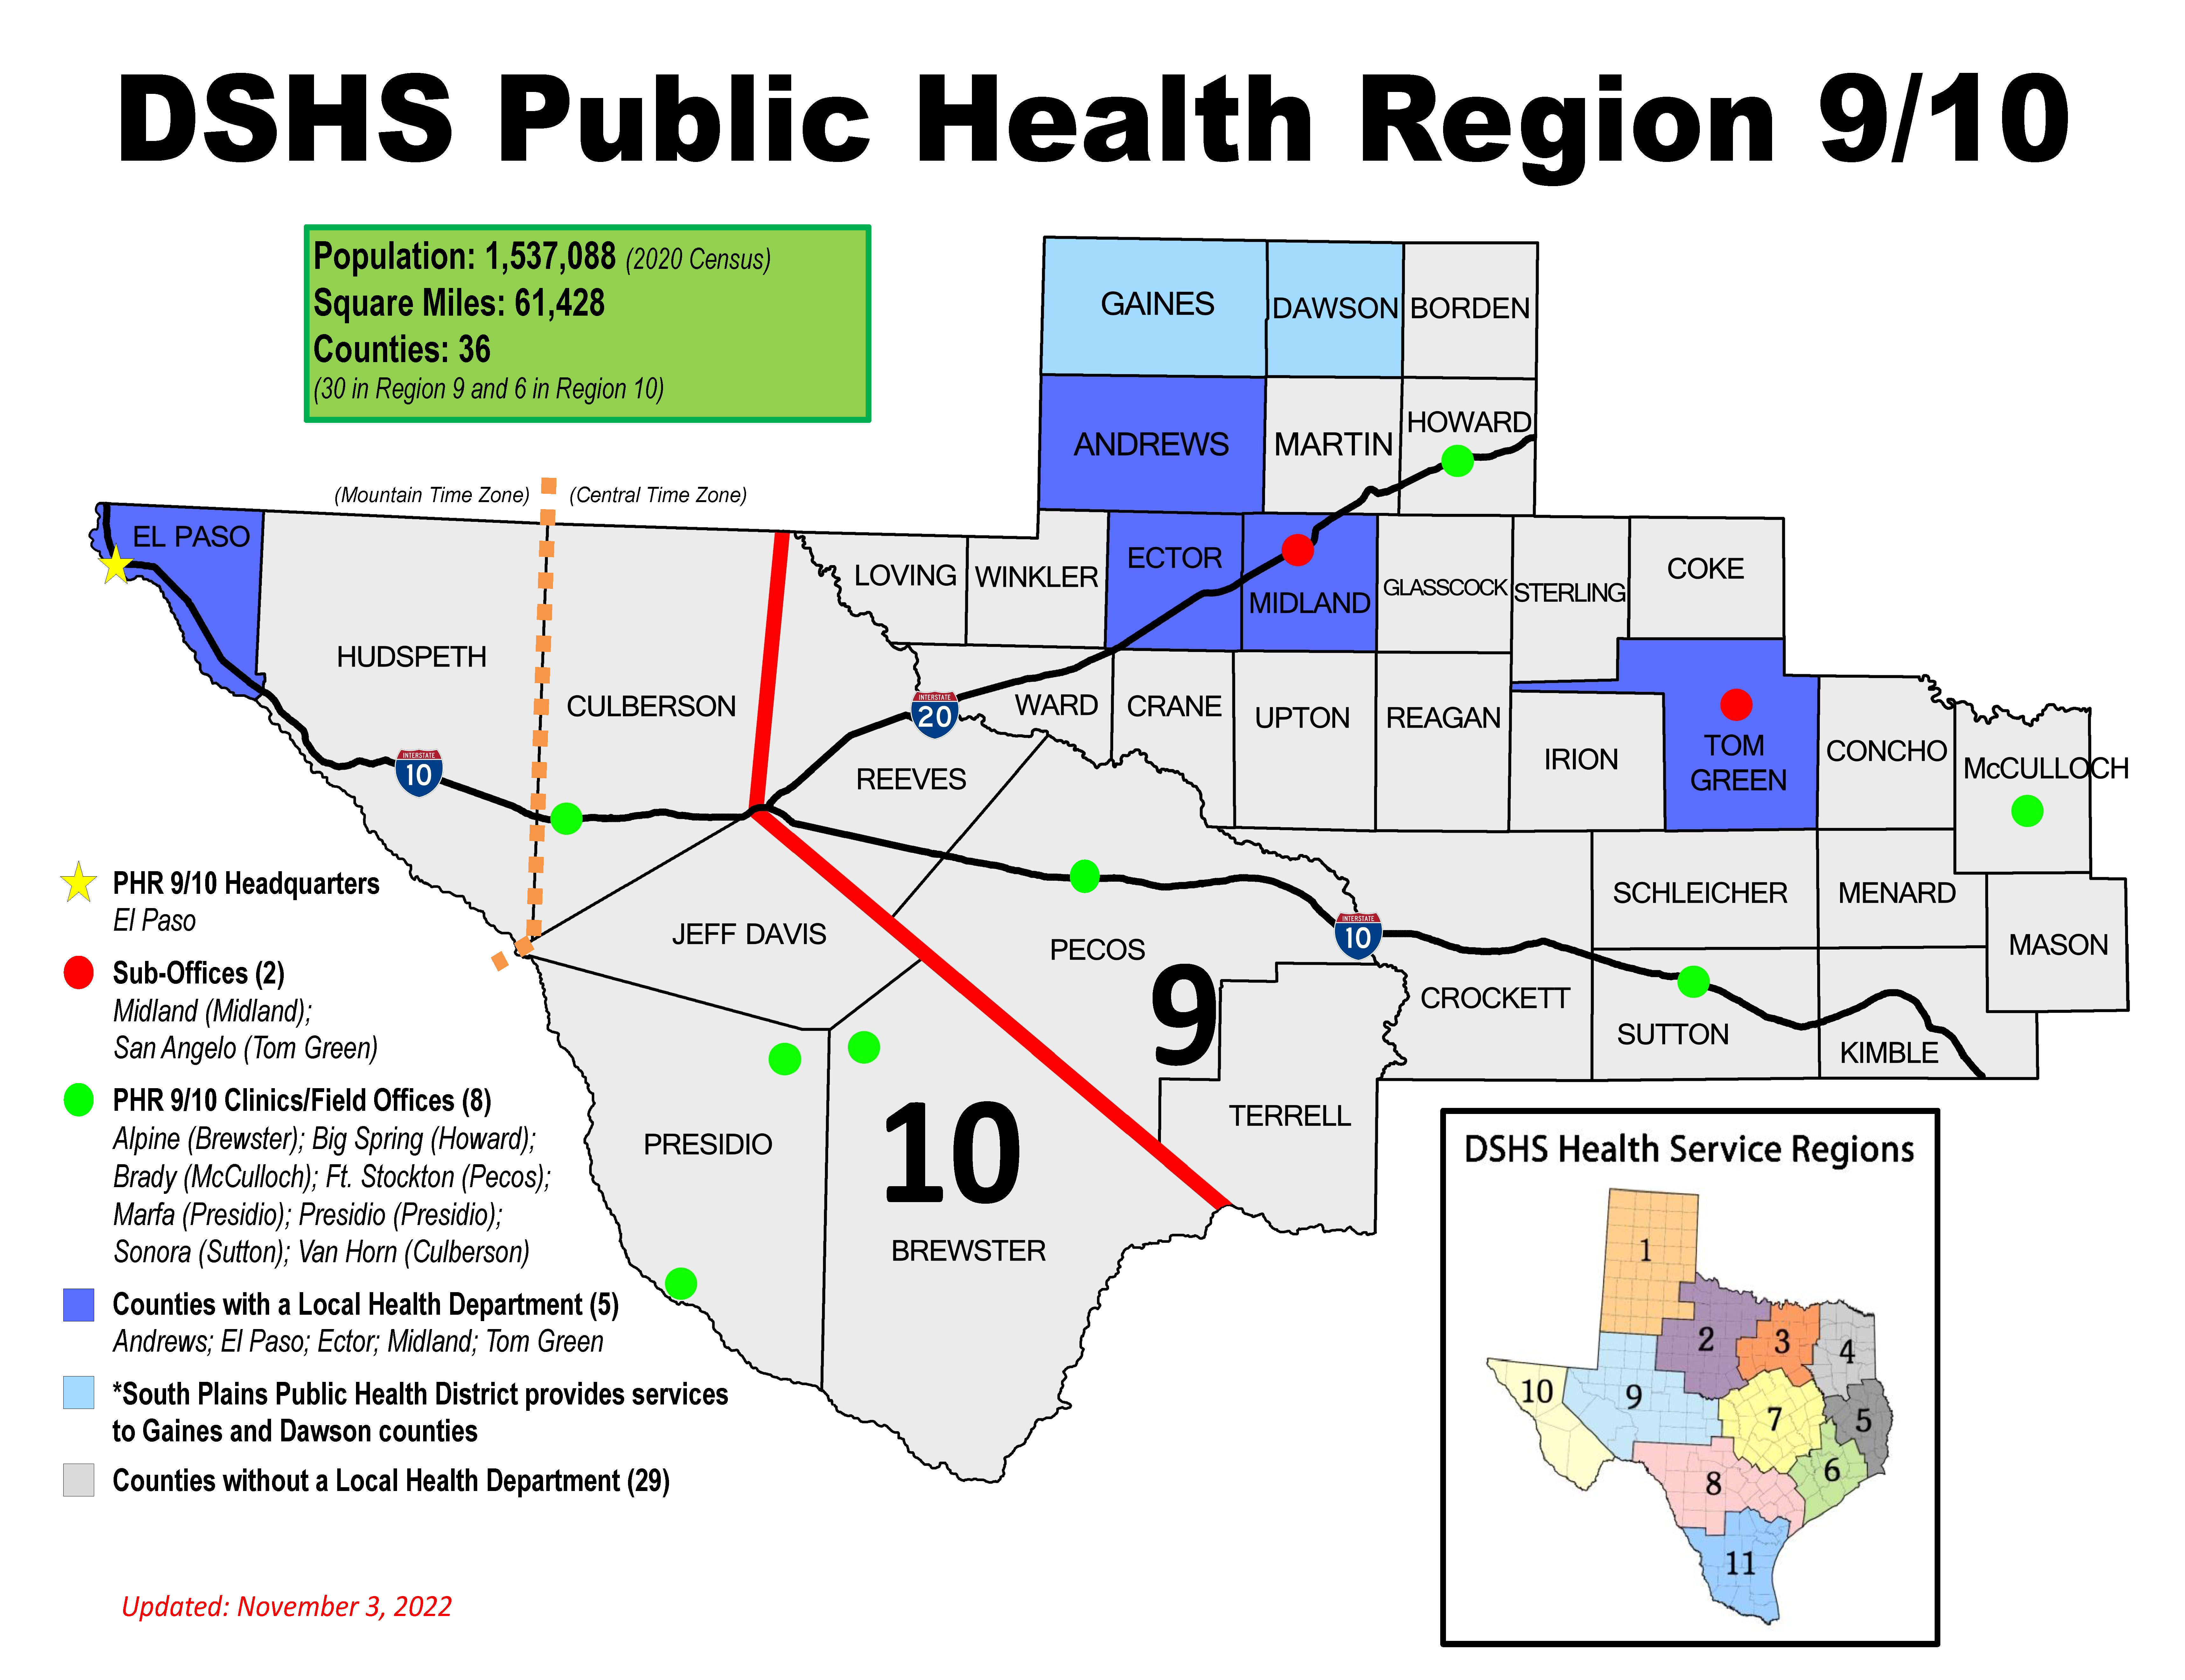 "A map displays public health office locations and coverage within in public health region 9/10"